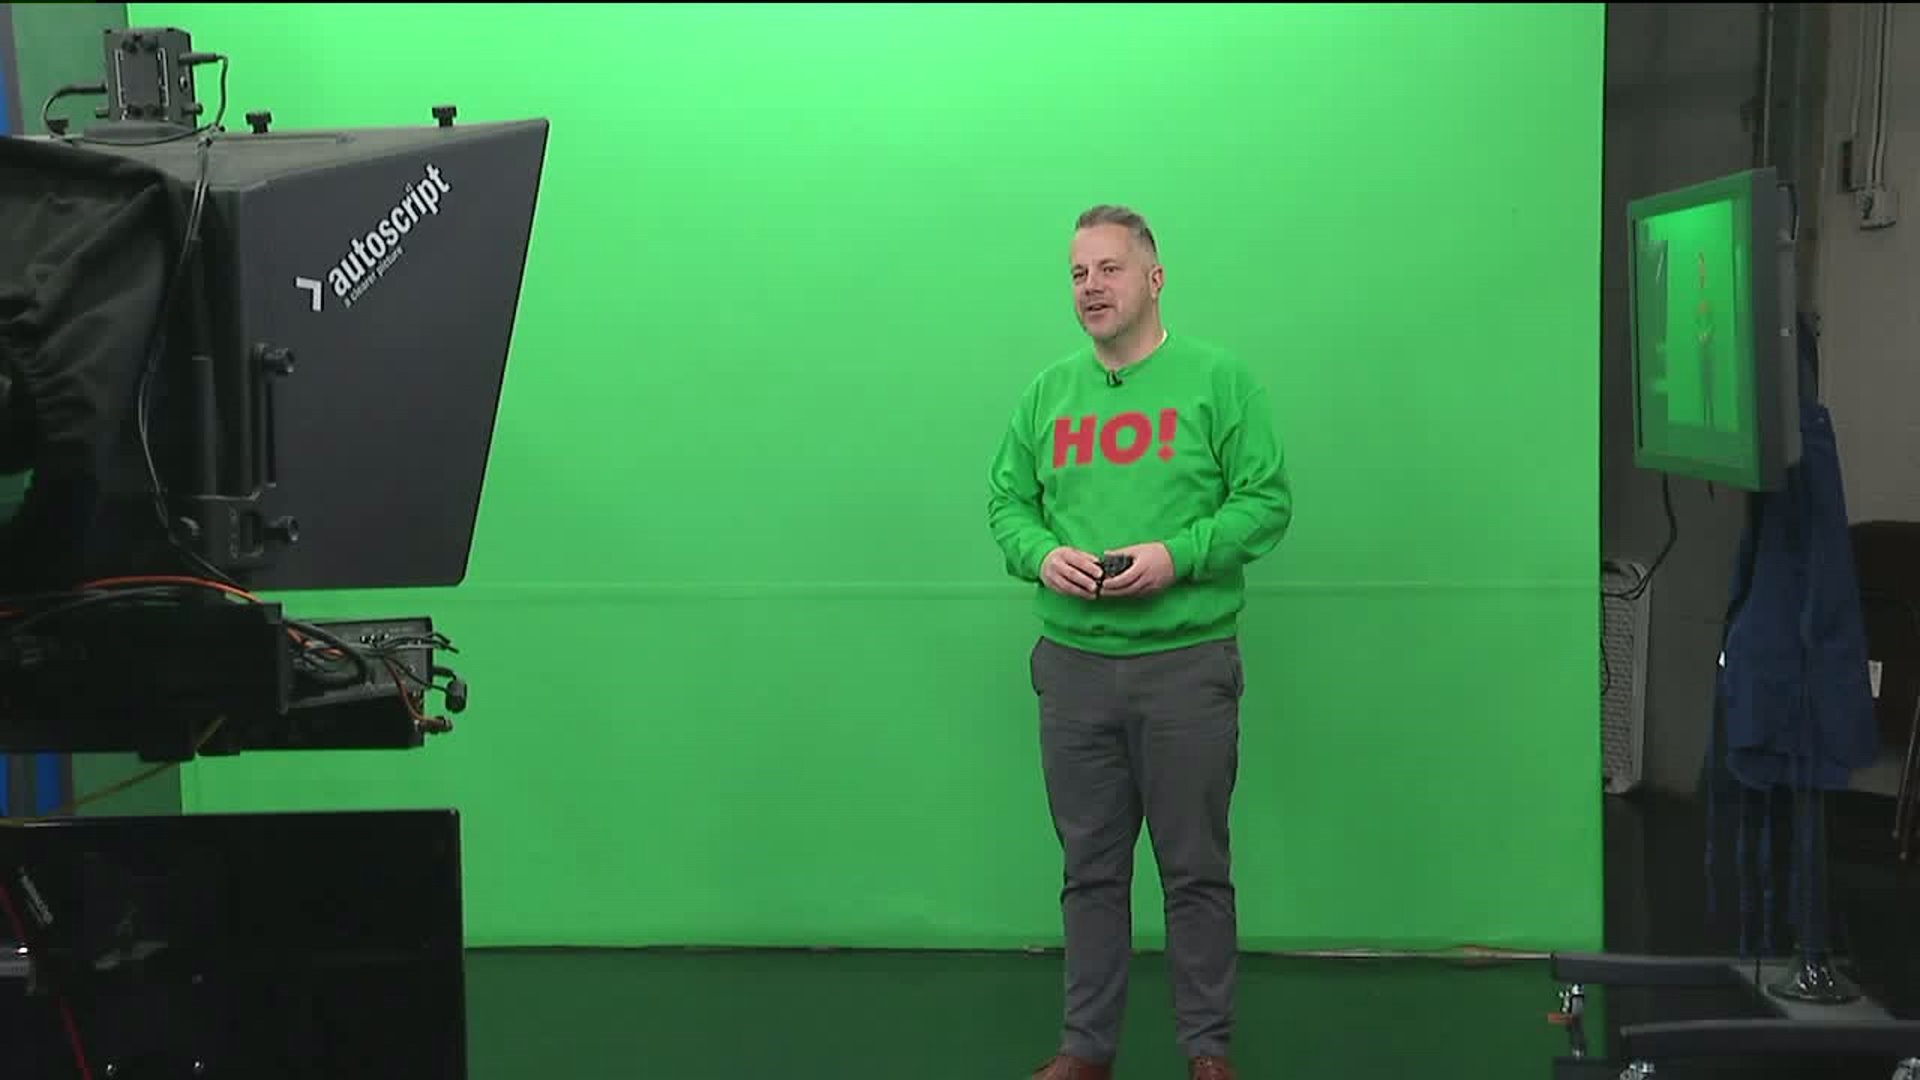 What Happened When Eric Wore His Ugly Christmas Sweater on the Green Screen